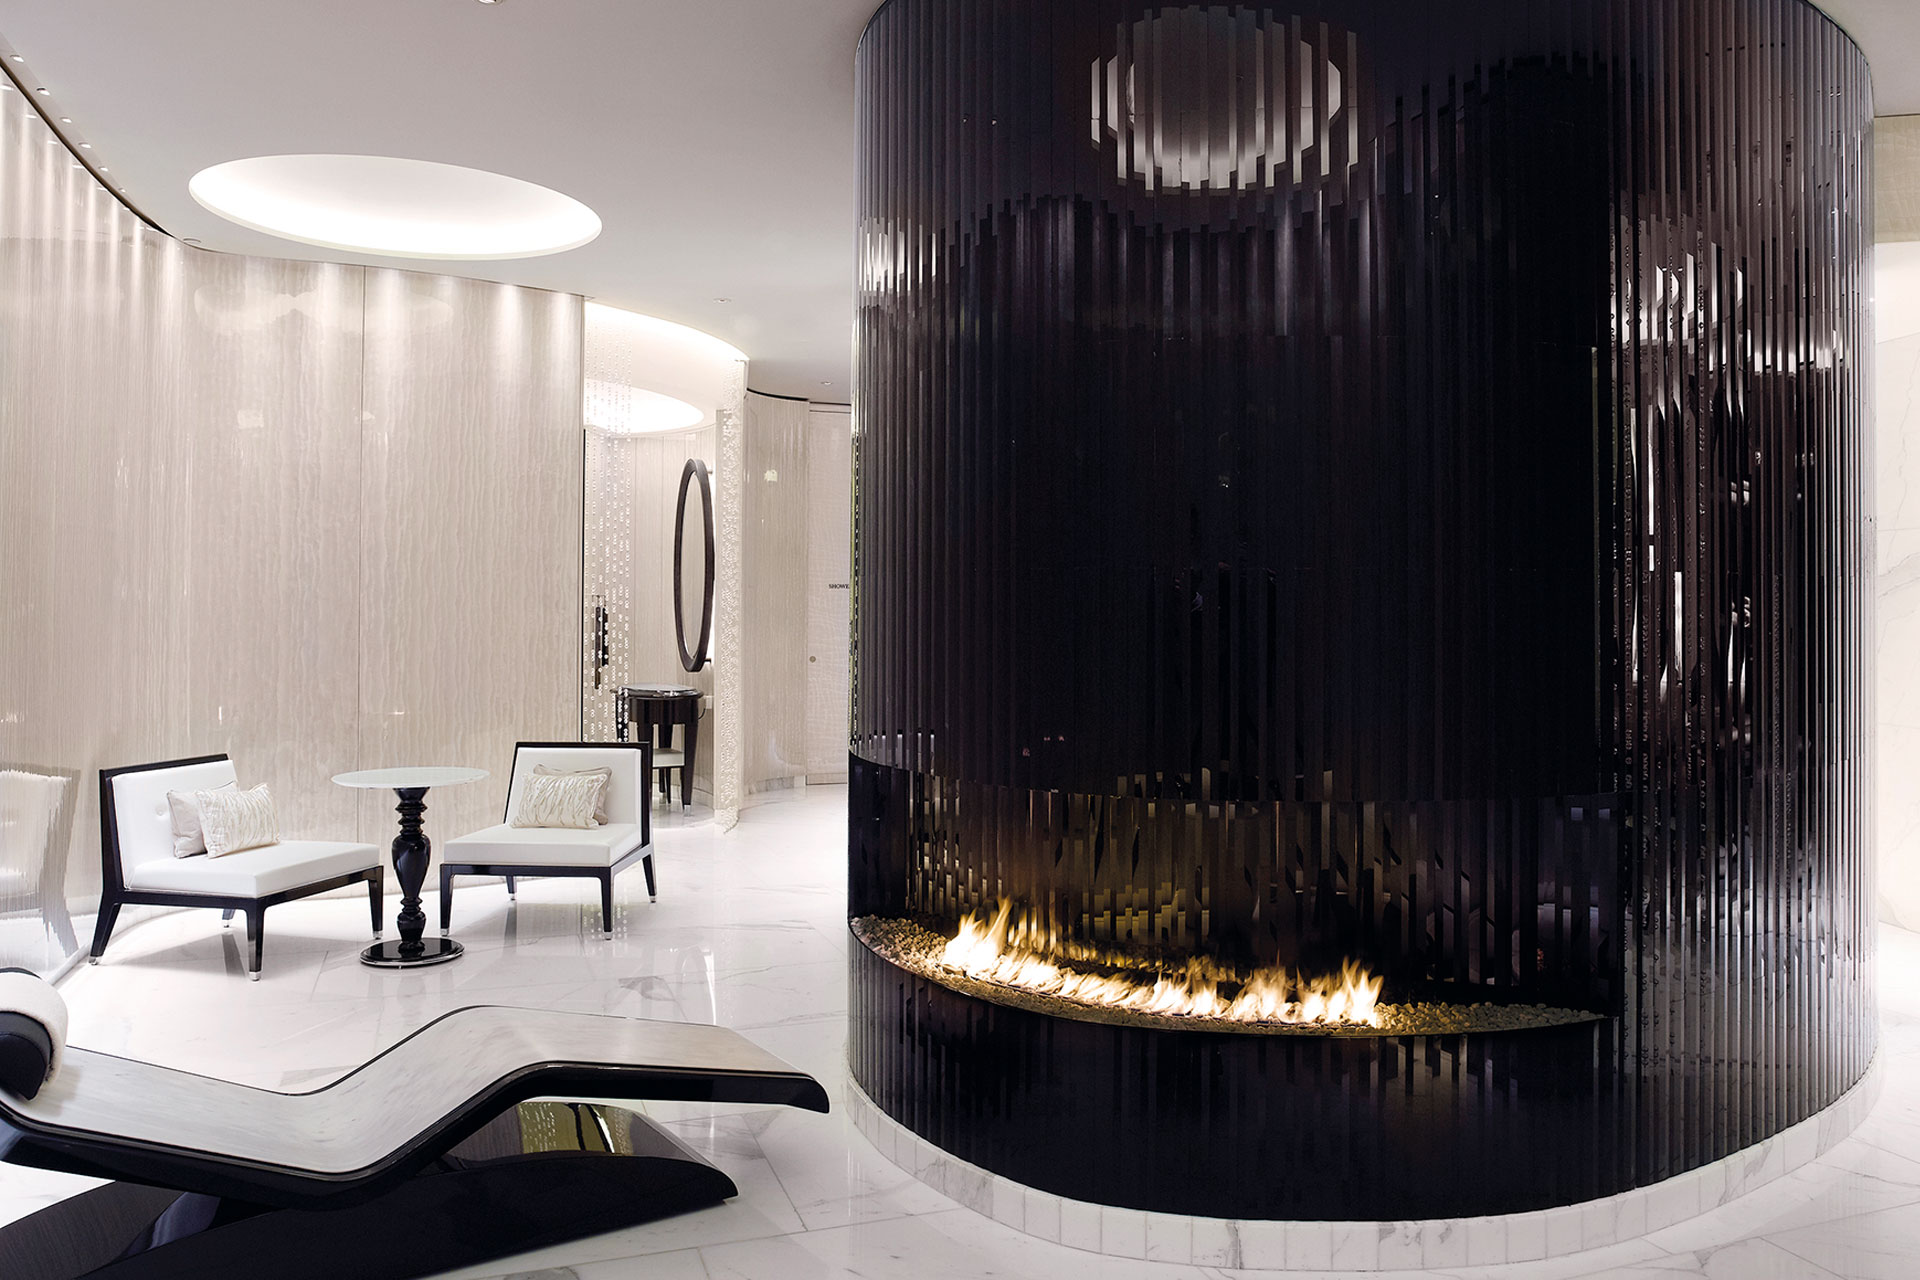 A big fireplace, two white loungers,